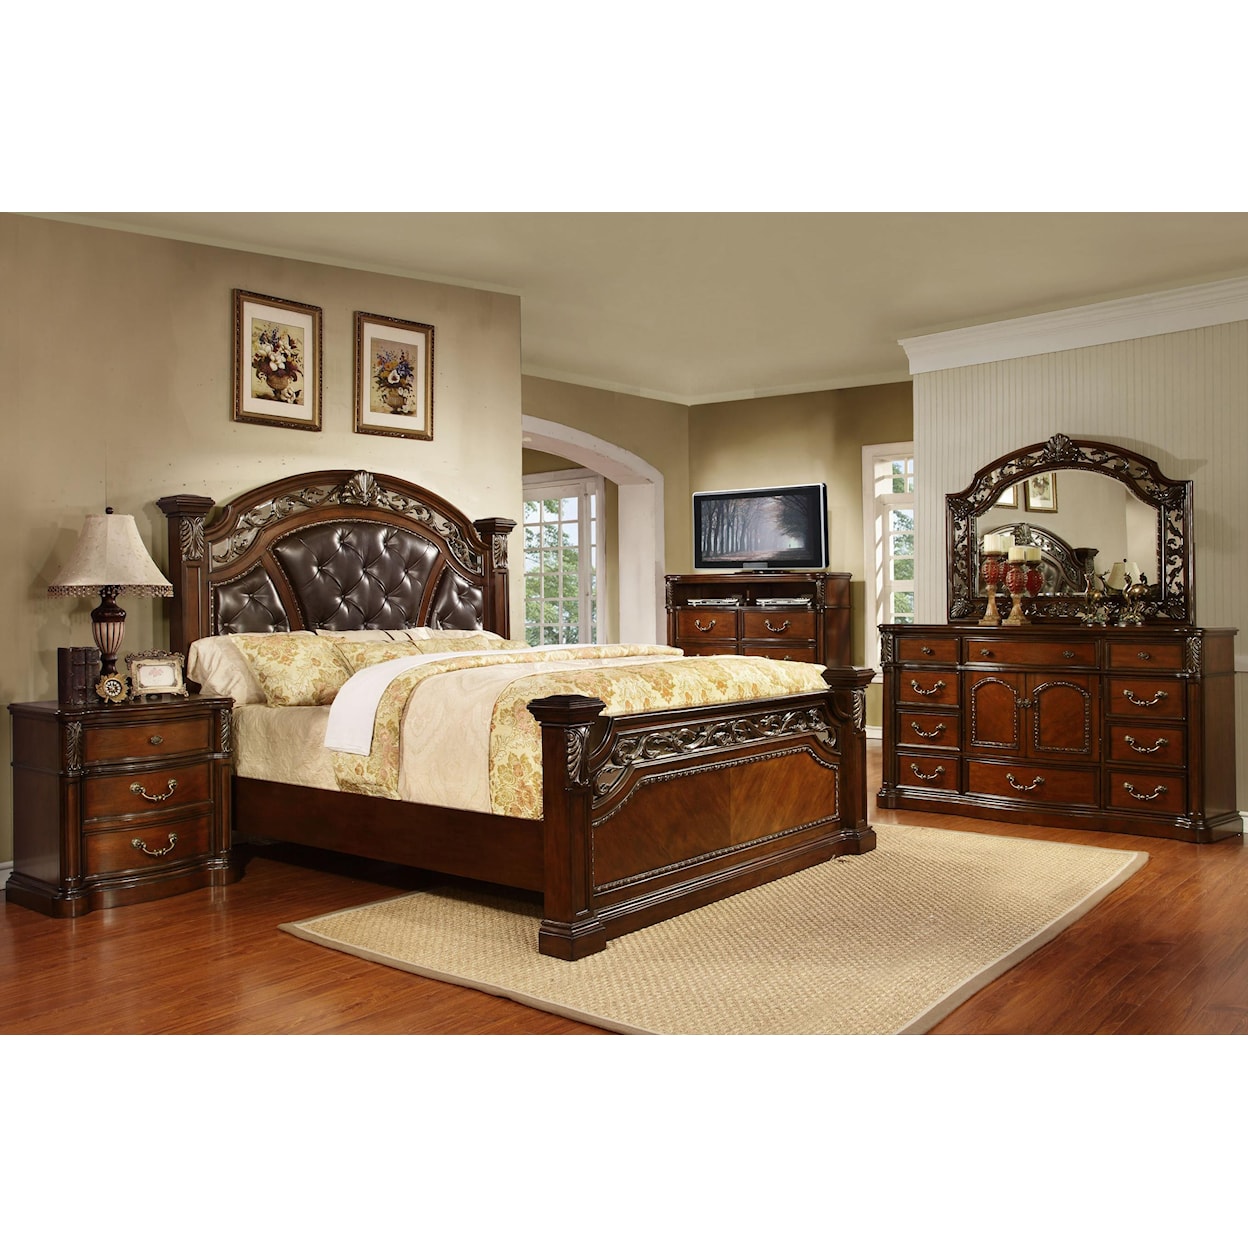 Avalon Furniture Vistoso Queen Bedroom Group